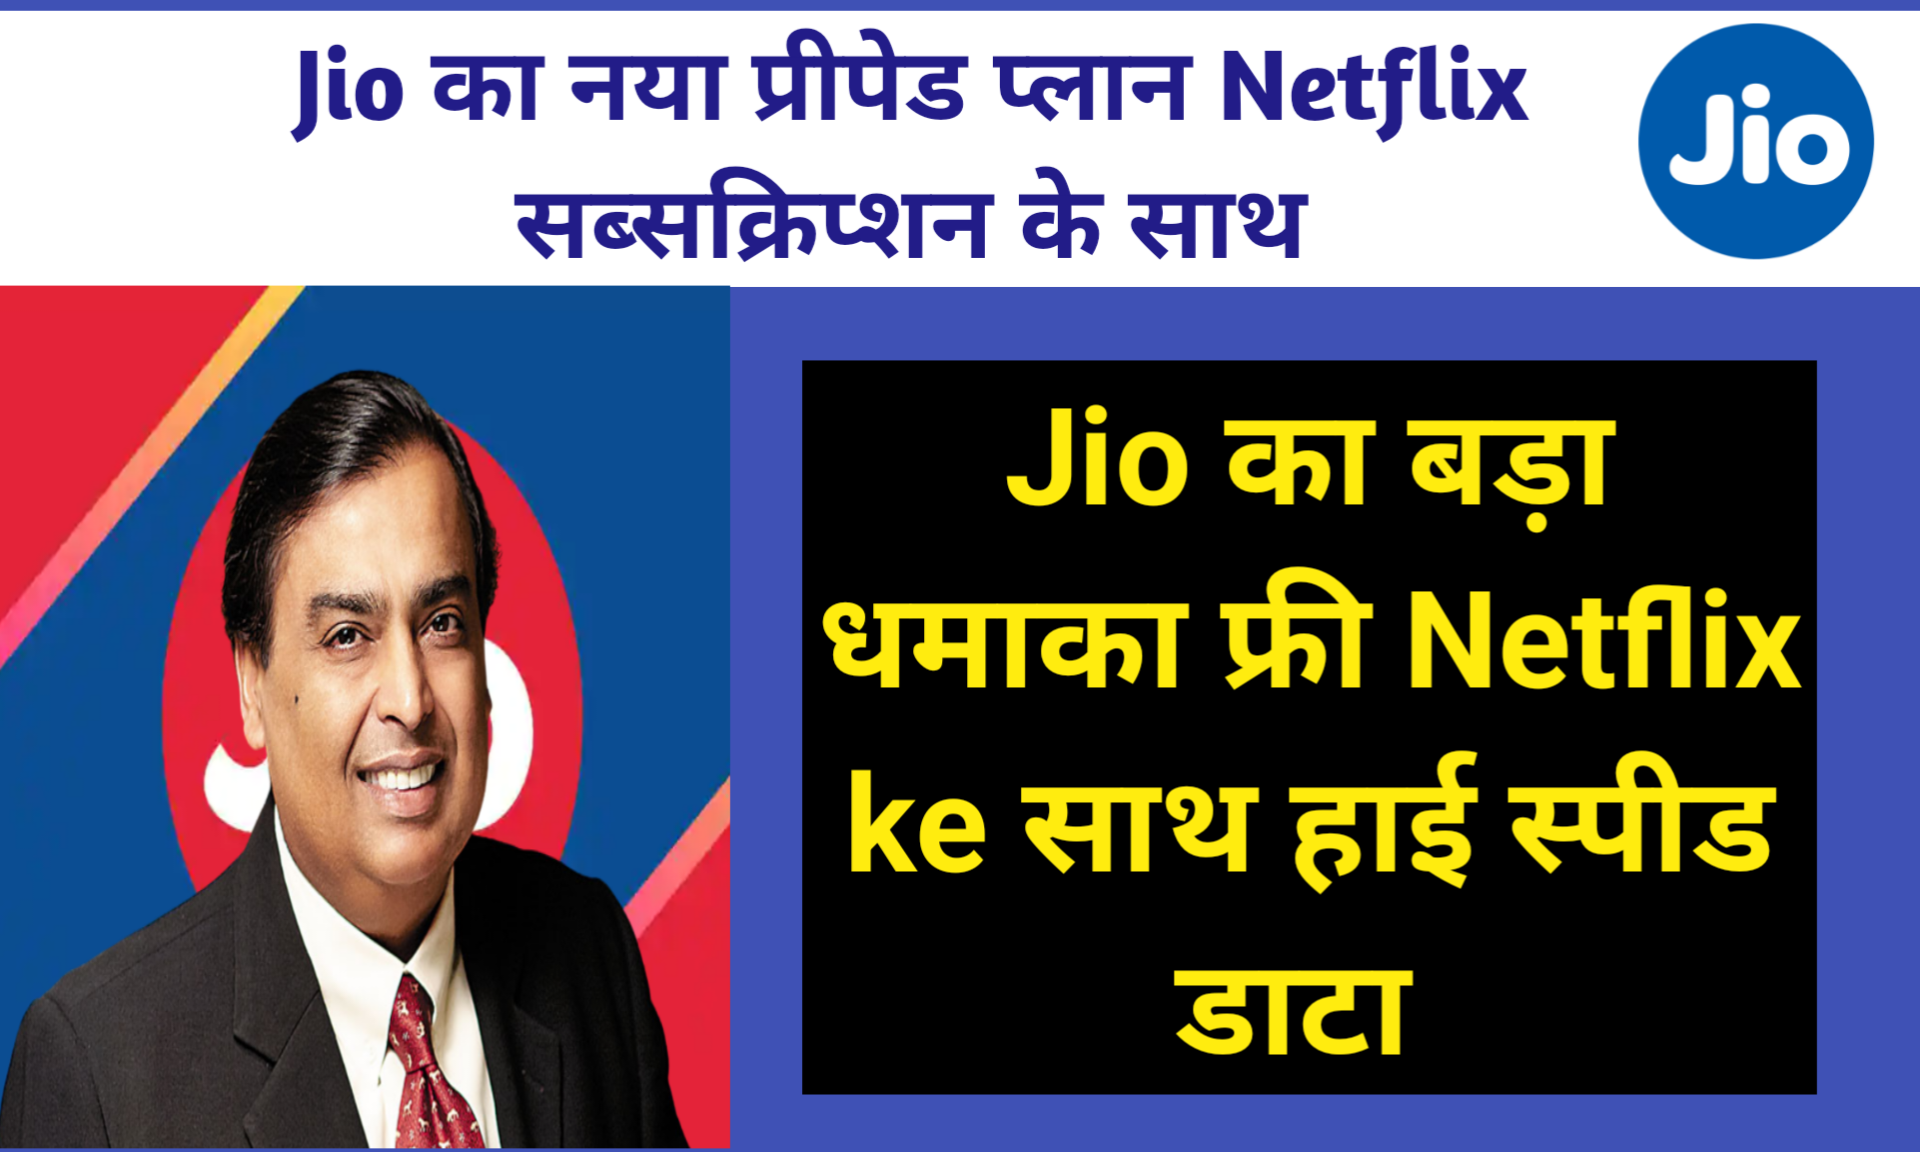 Reliance Jio New pre-paid plans with Netflix Subscription